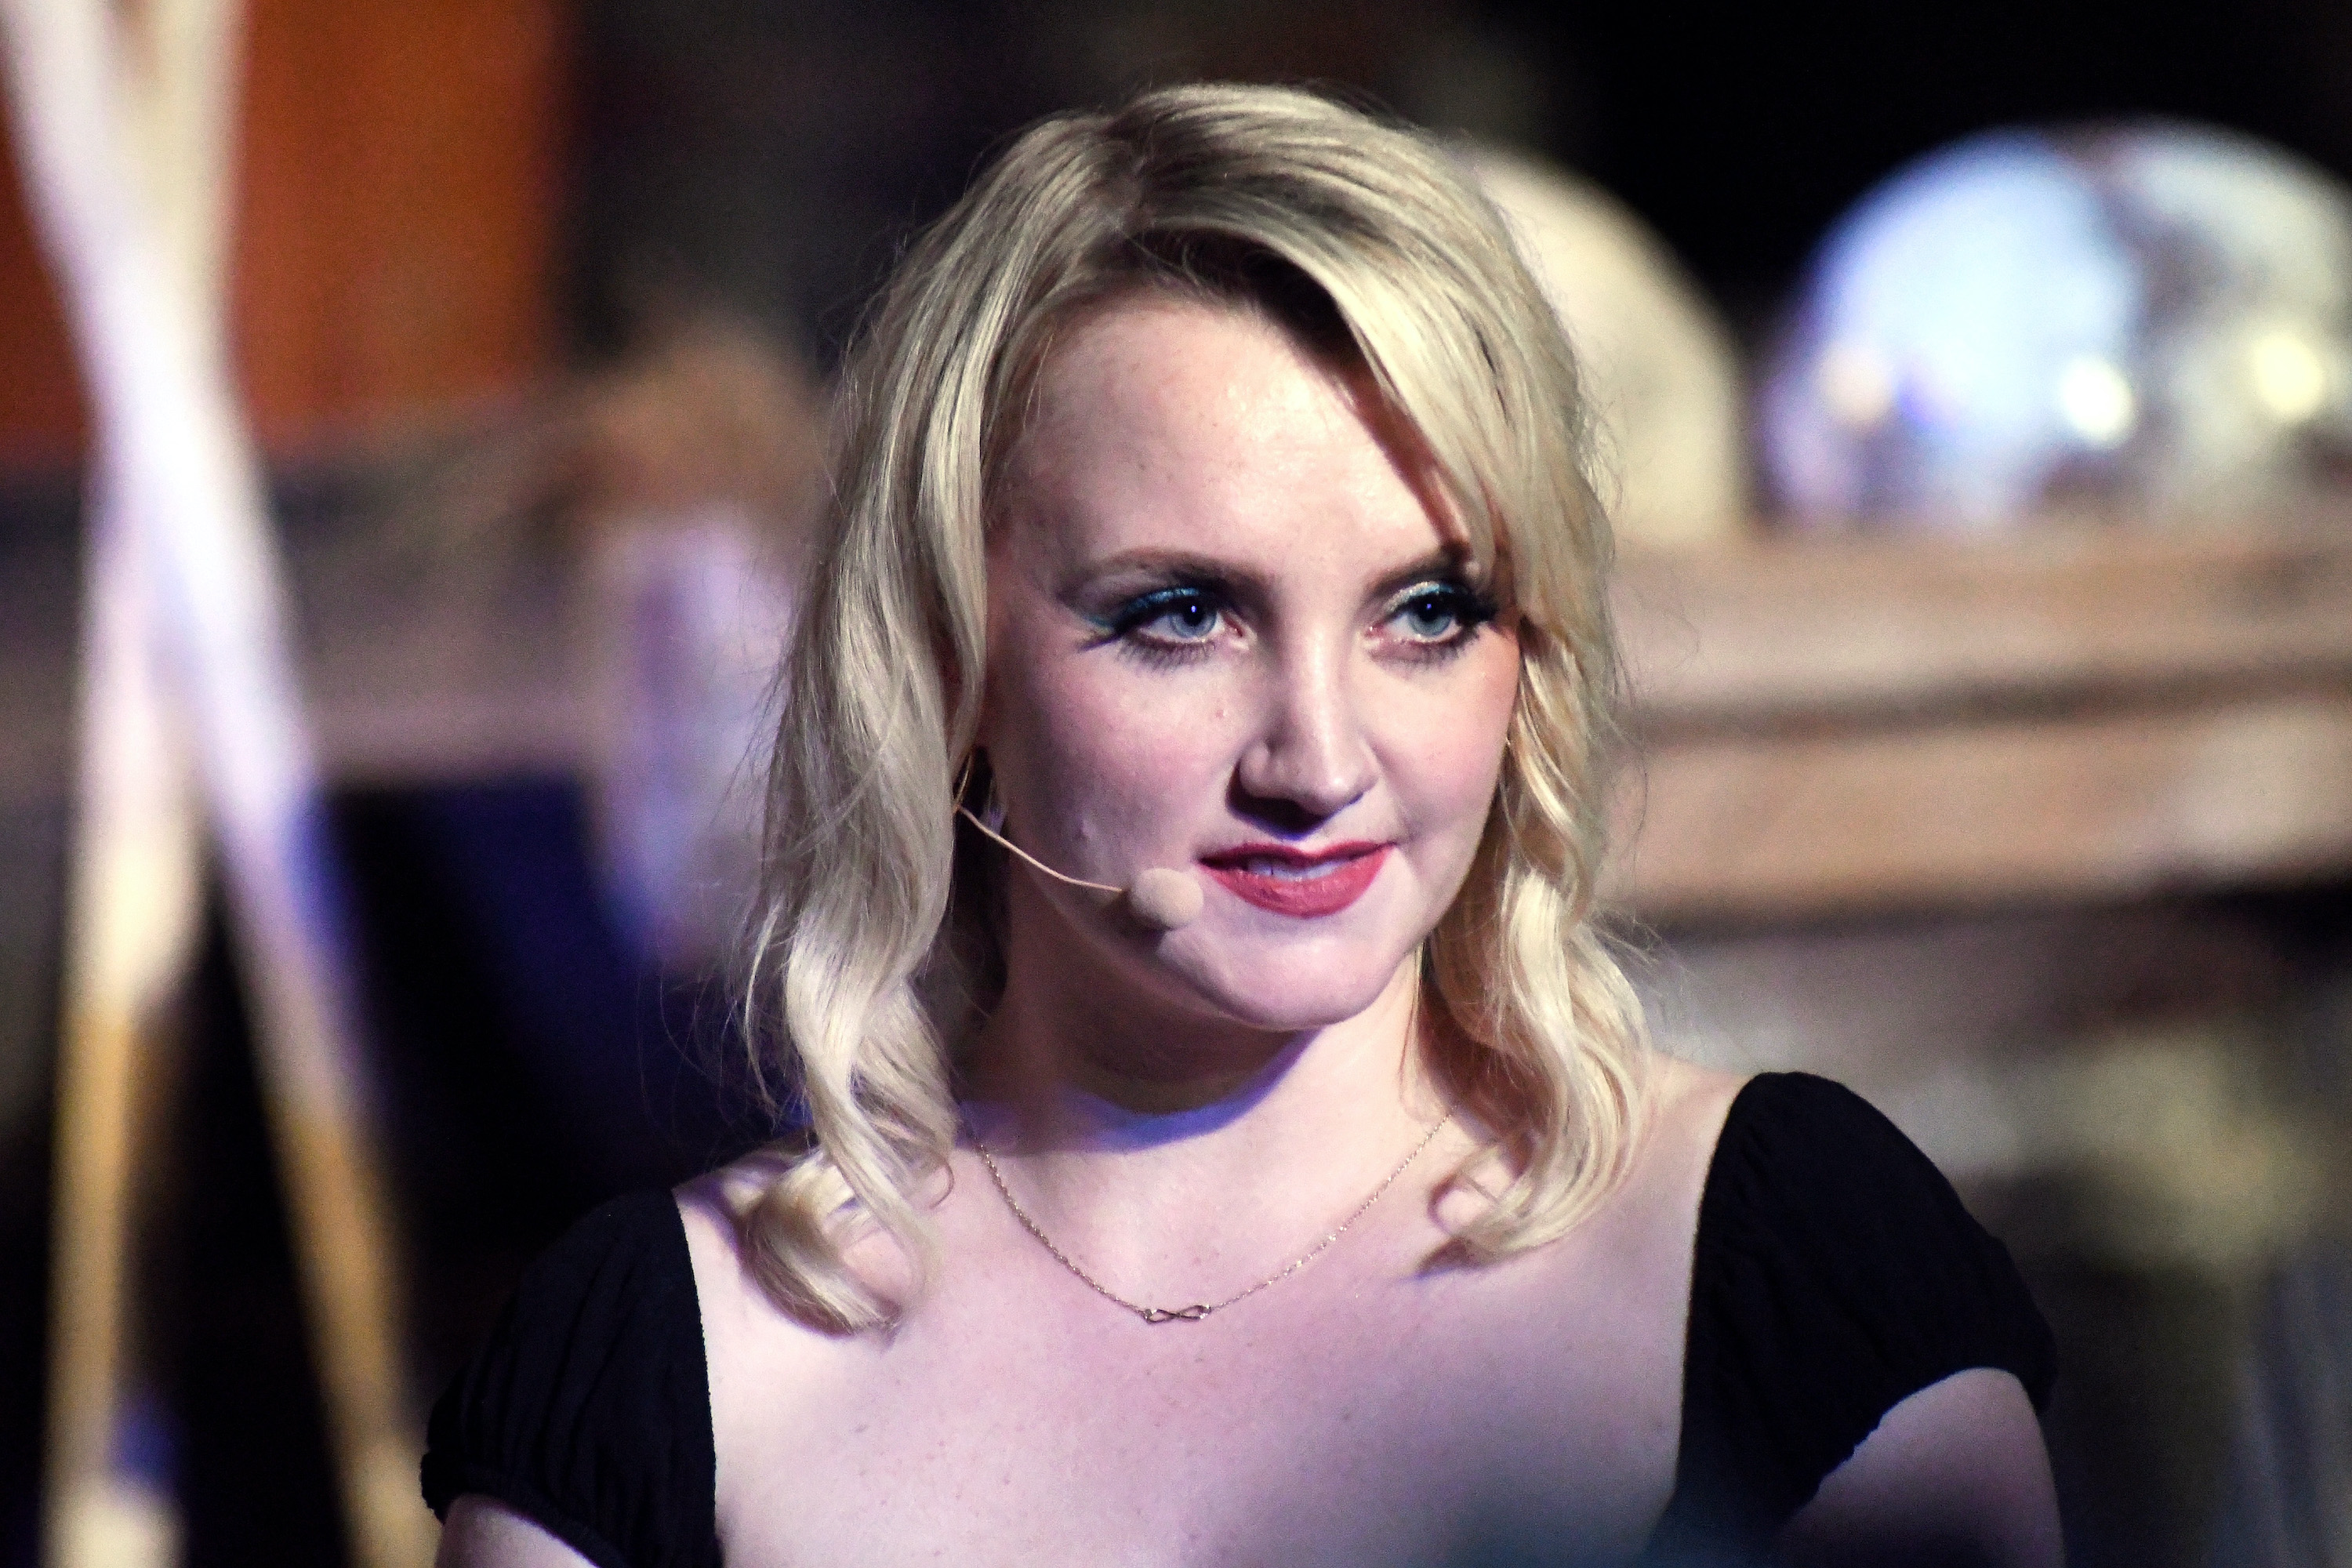 Is ‘Harry Potter’ Fan Culture ‘Unhealthy’? Evanna Lynch Thinks So